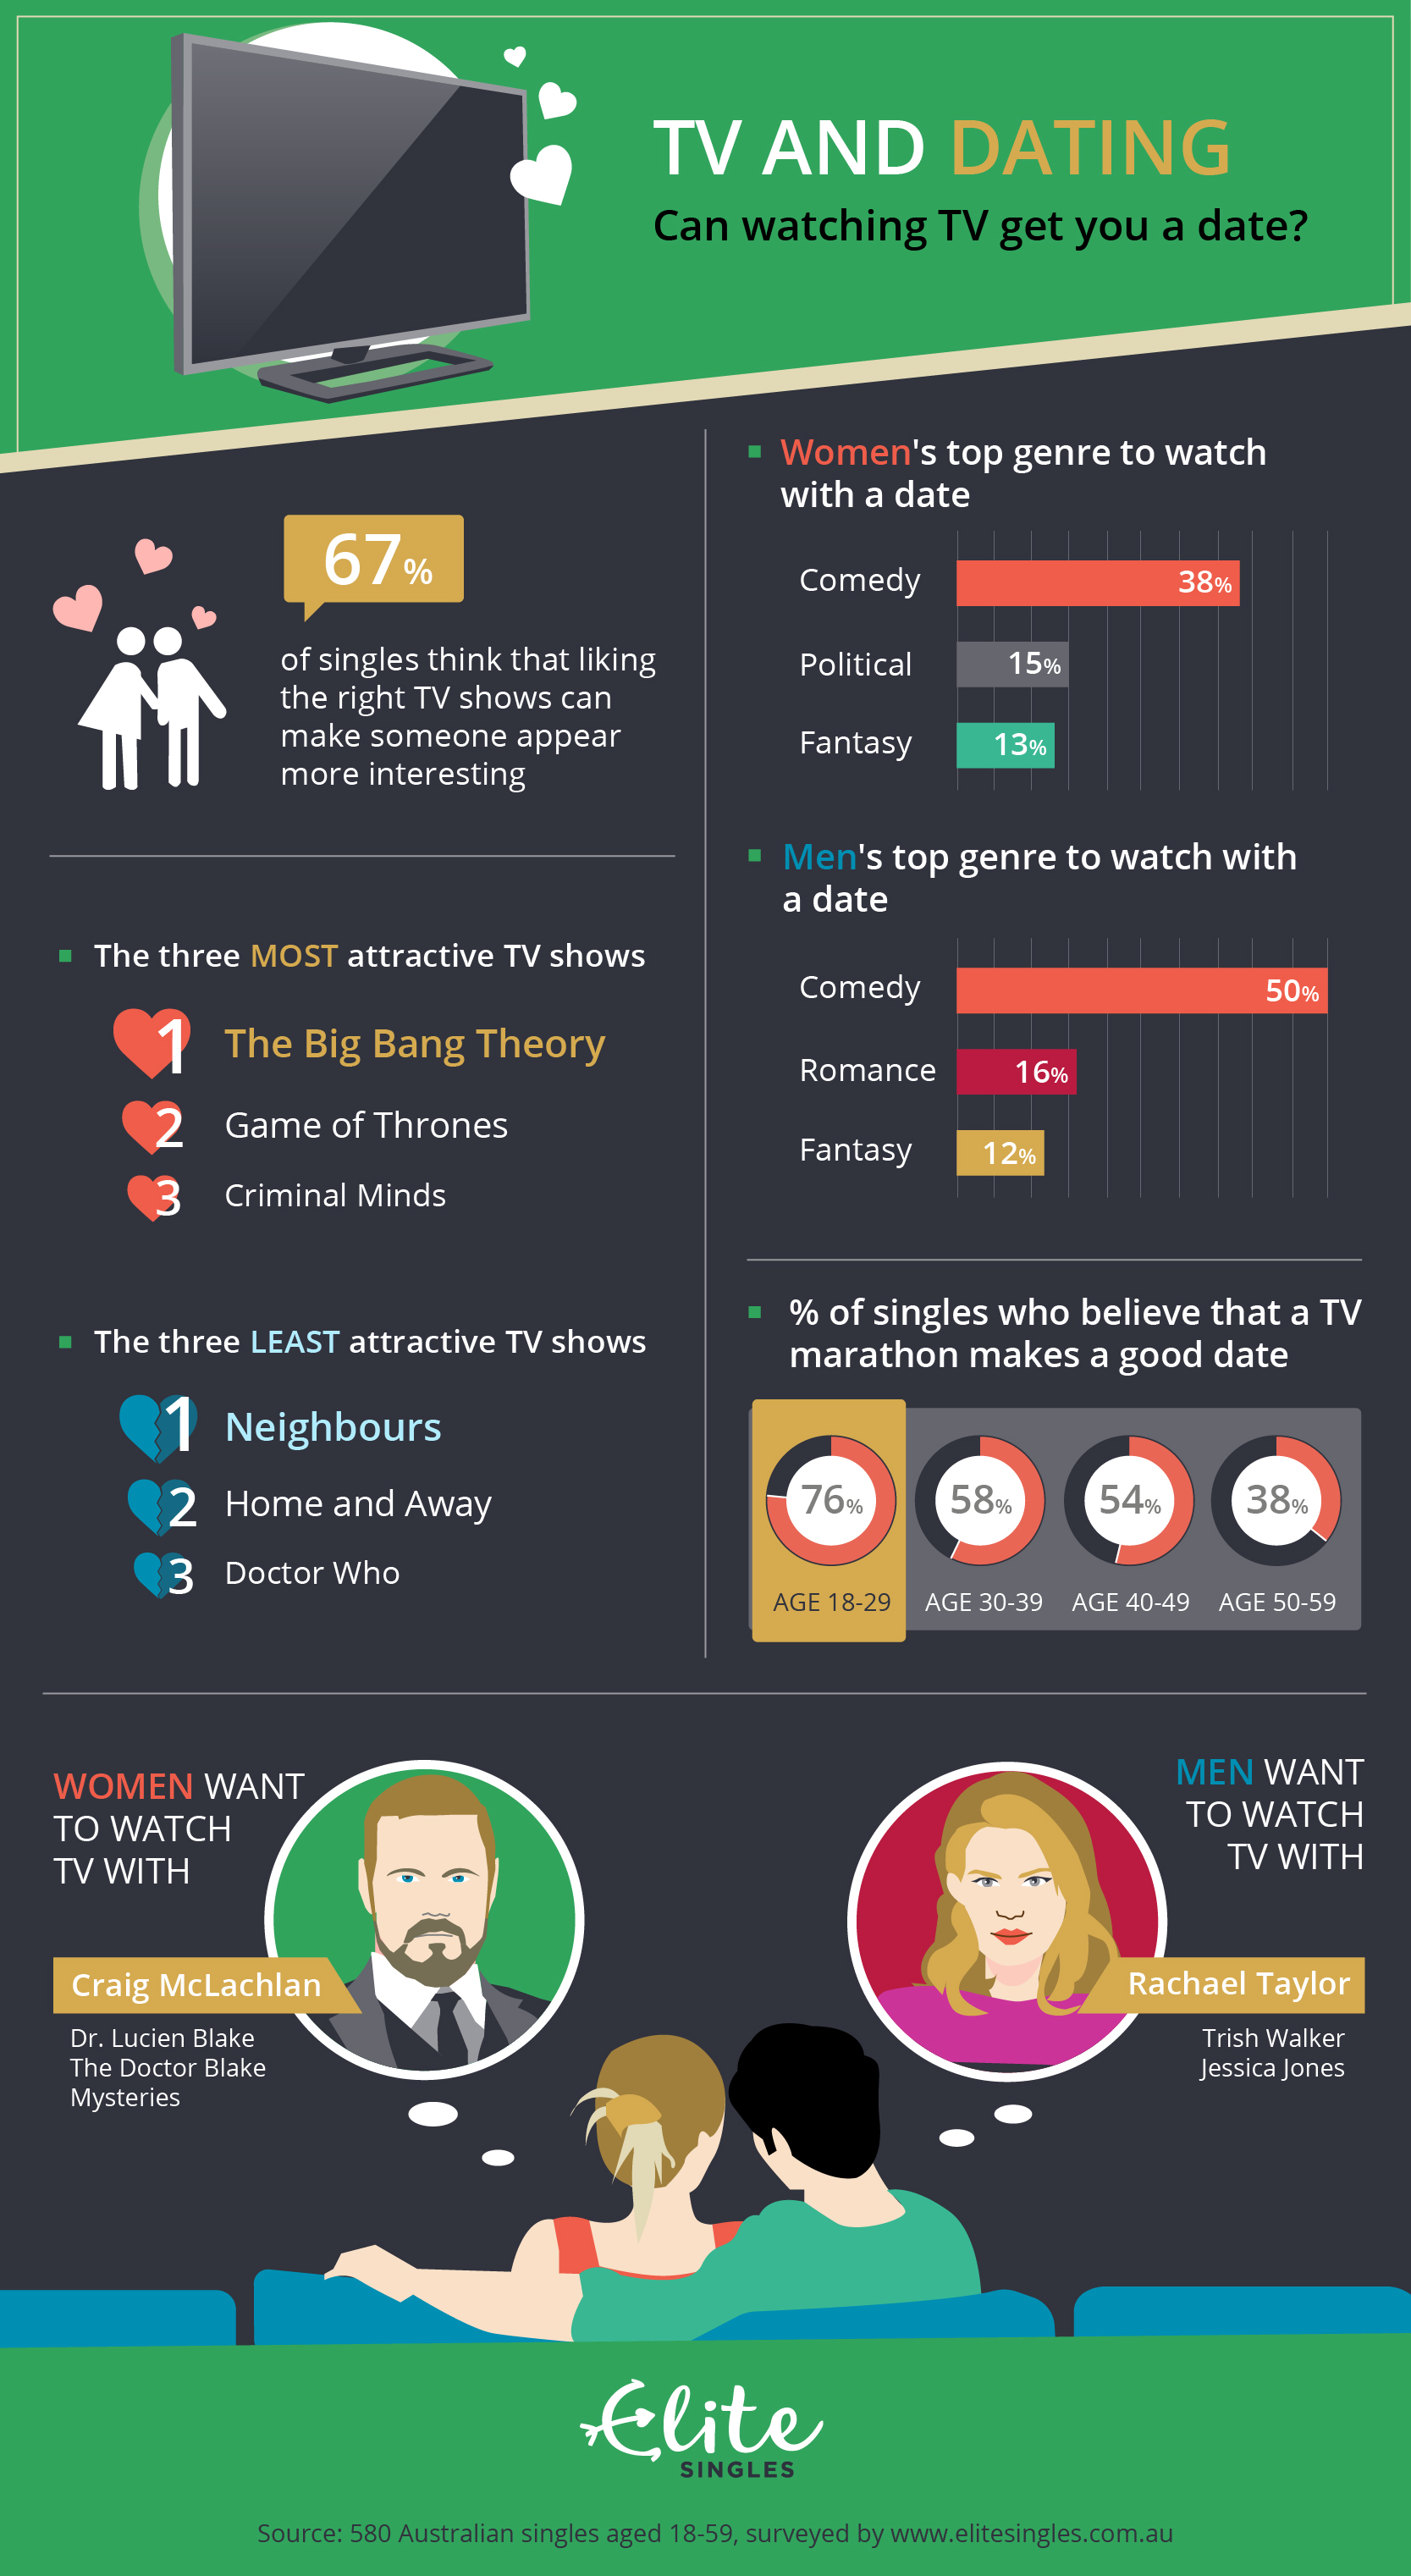 EliteSingles infographic showing the results of the TV and dating survey